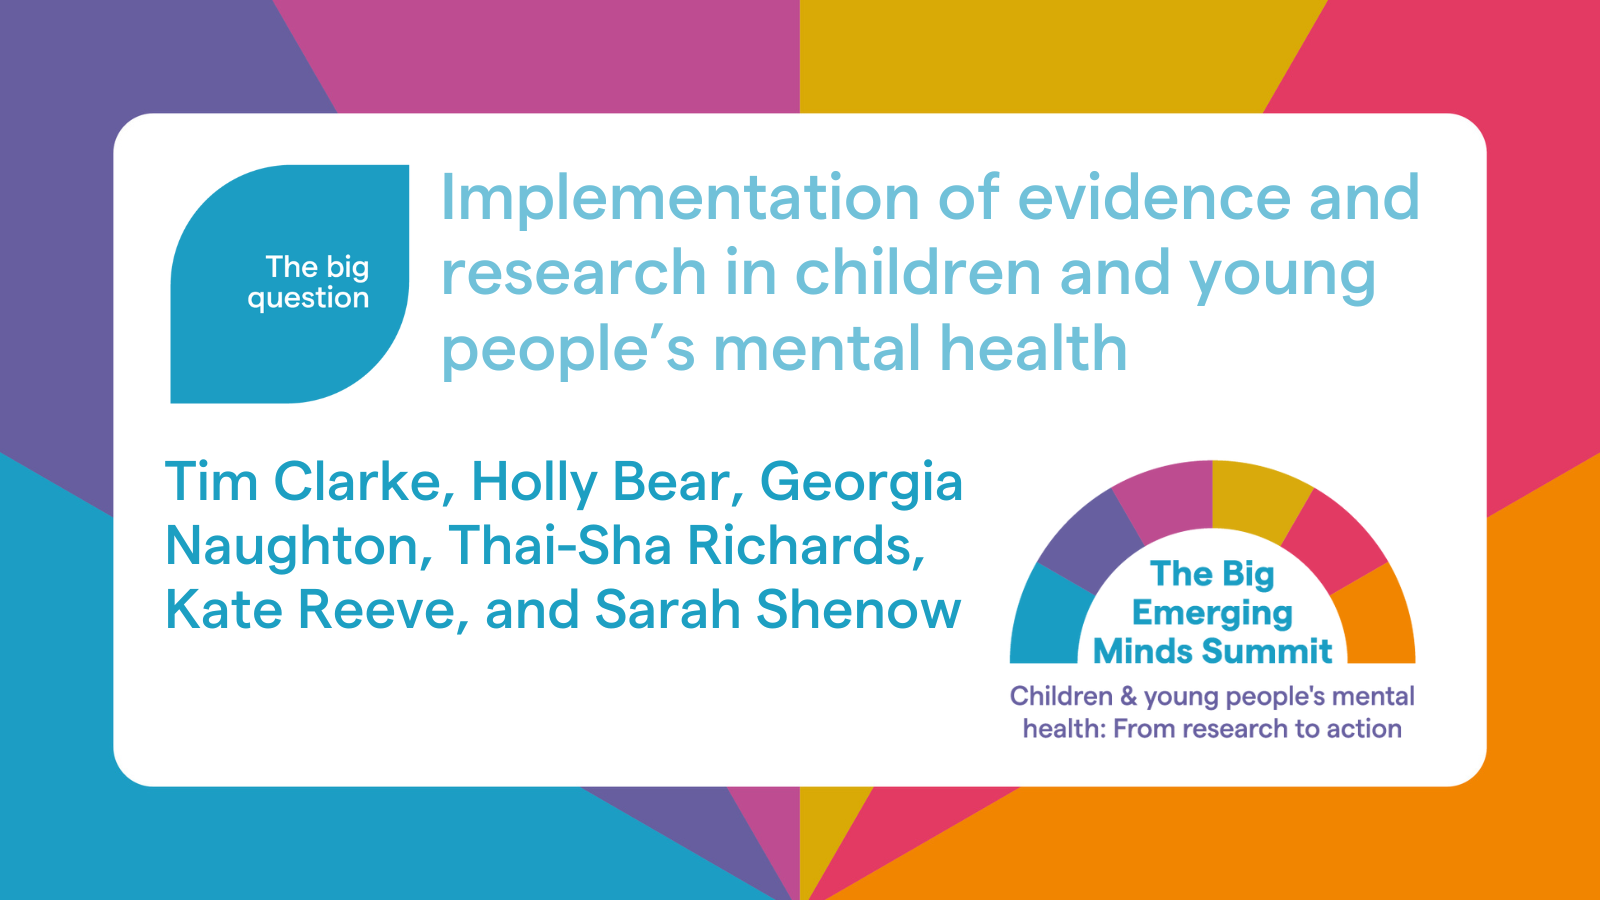 Implementation of evidence and research in children and young people's mental health